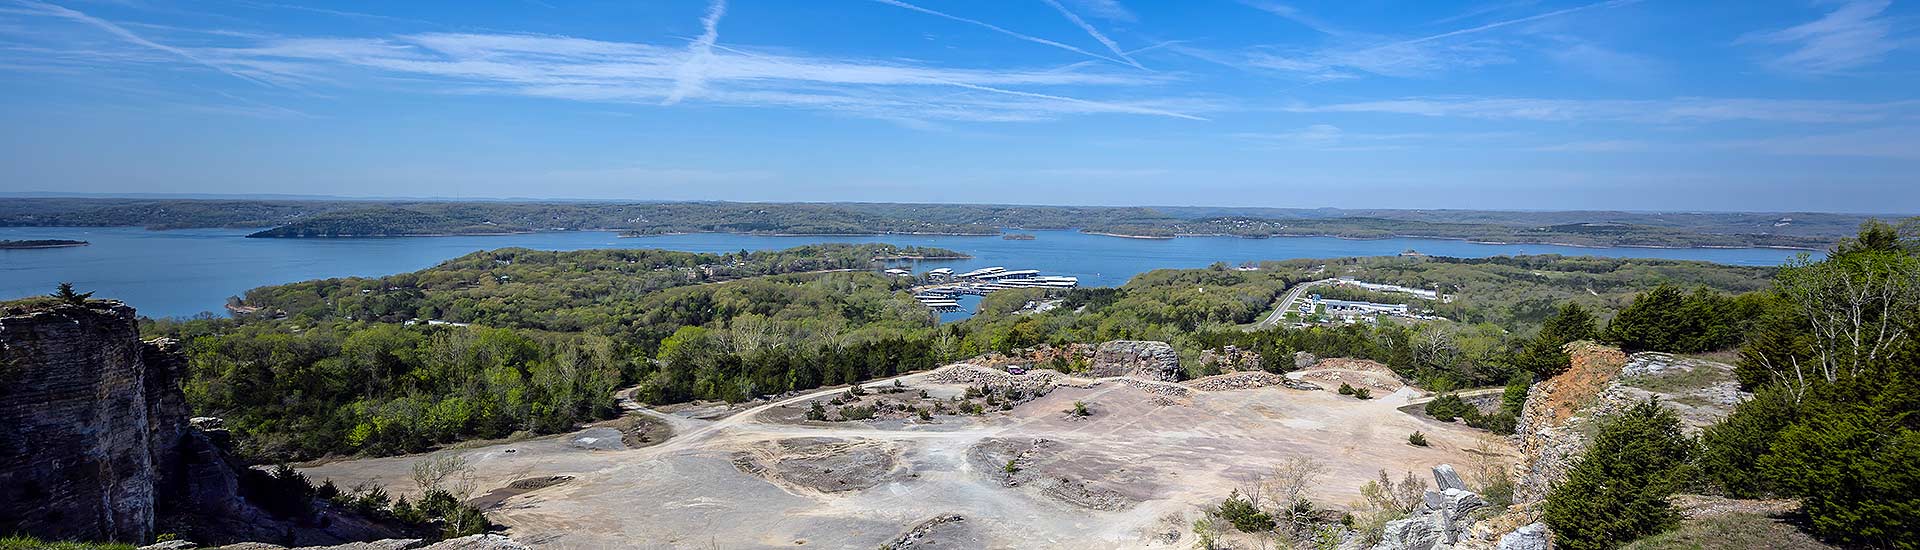 Panorama of Table Rock Lake and sandy quarry below Baird Mountain, from Pink Jeep Tours mountaintop viewpoint.